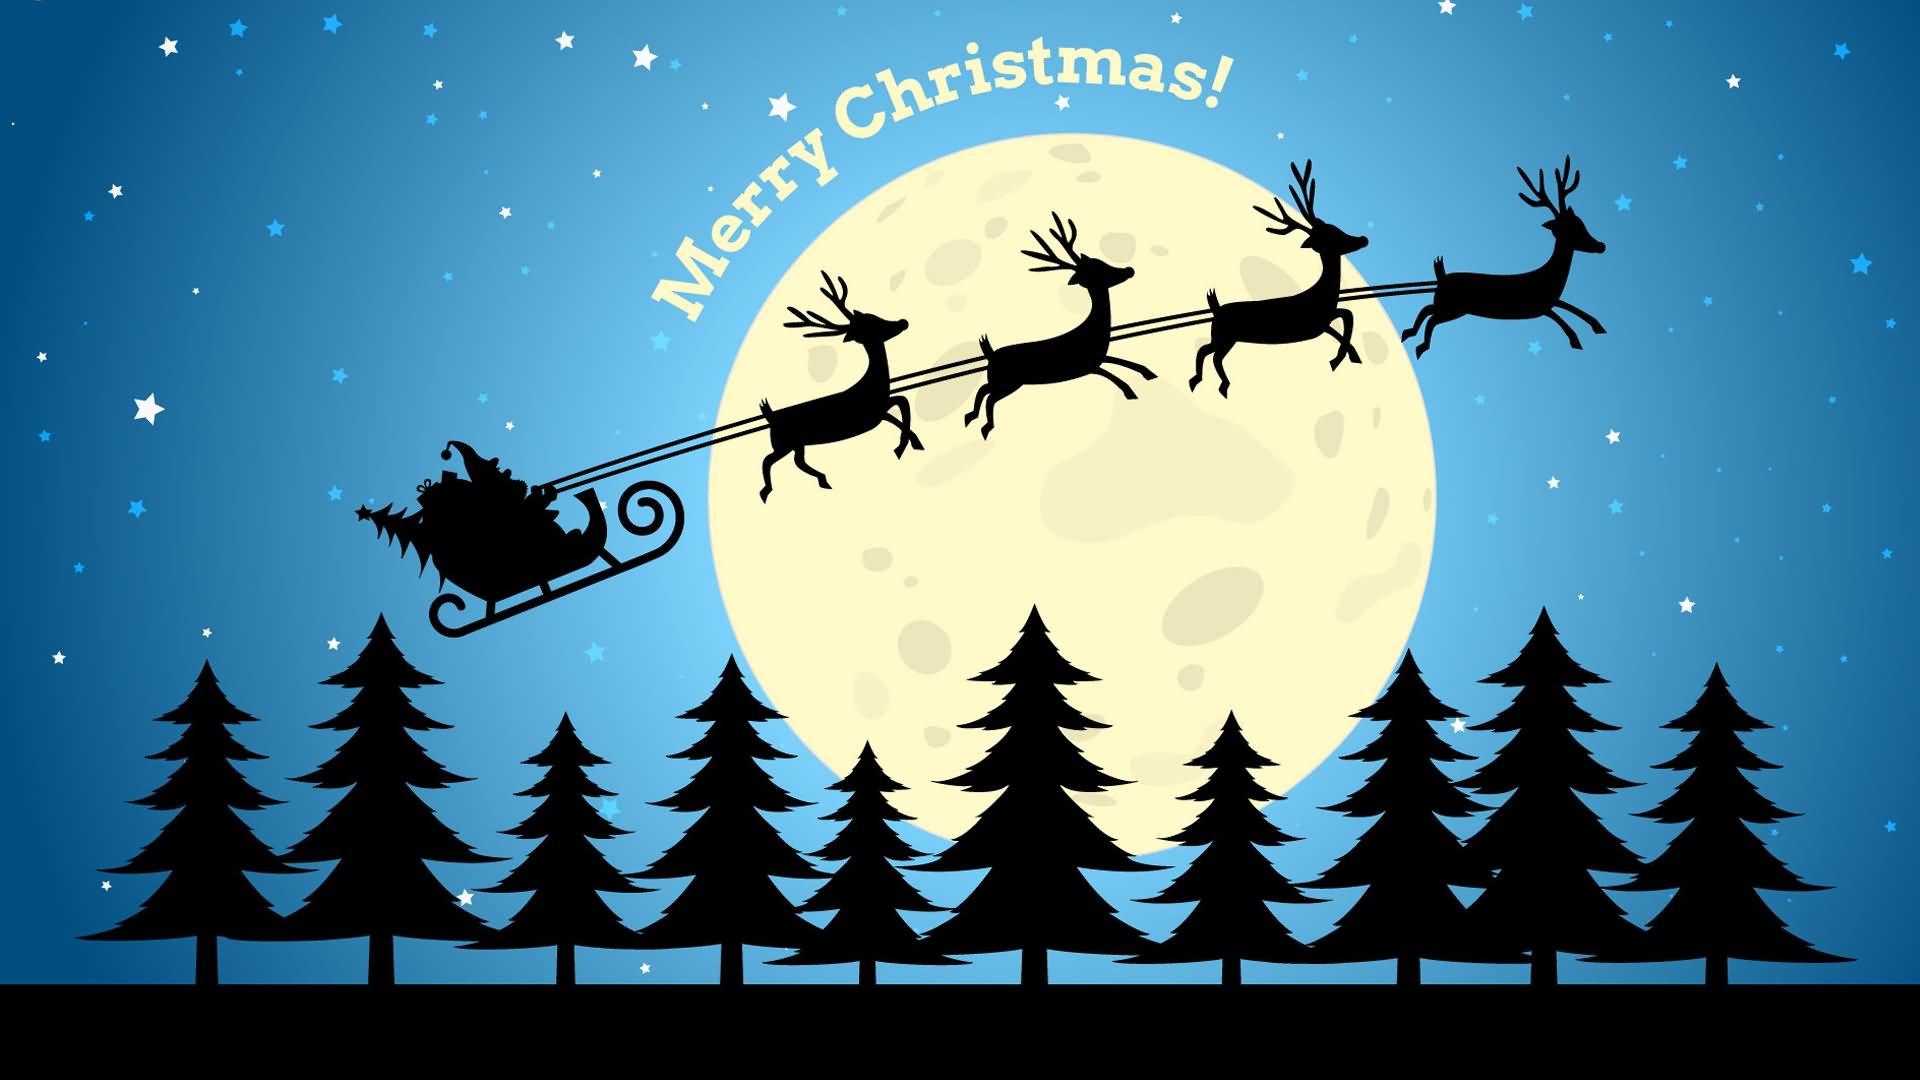 Merry Christmas Full Moon View Reindeer Cart Picture